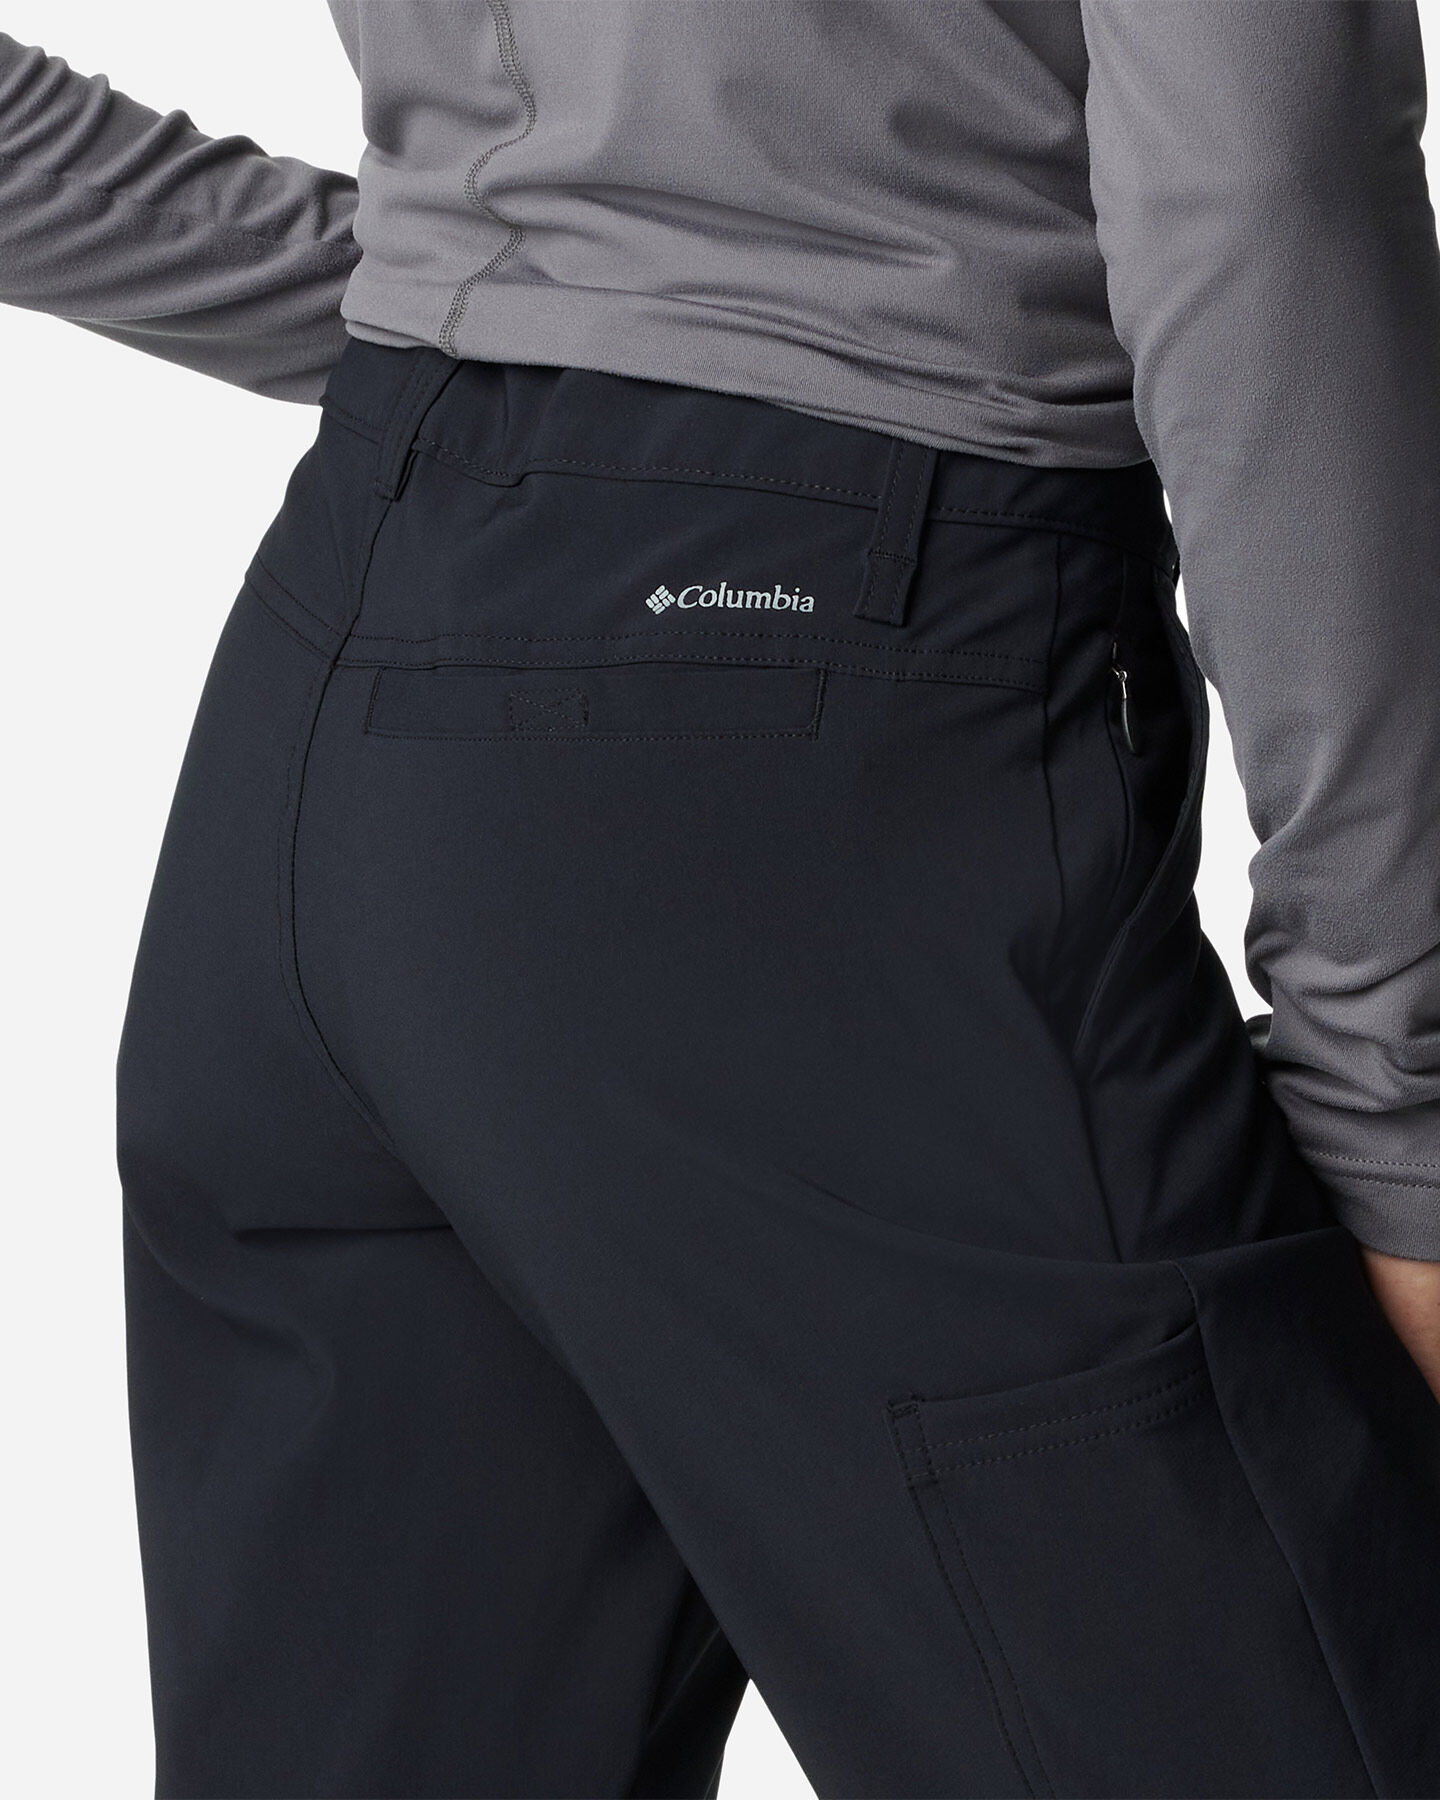  Pantalone outdoor COLUMBIA BACK BEAUTY W S5576563|010|6R scatto 4